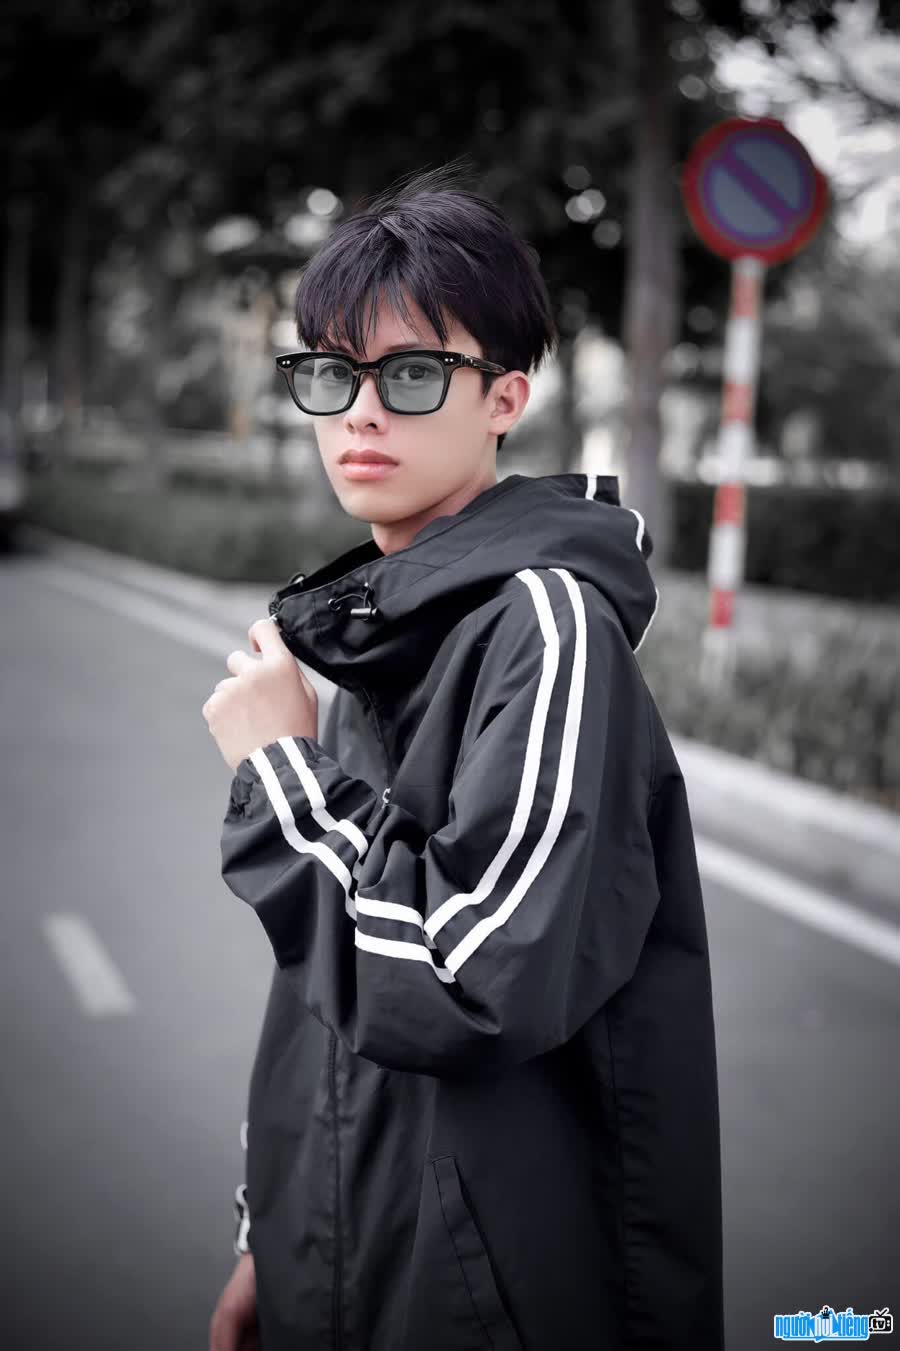 Phong Ka owns a bright face with a handsome masculine look